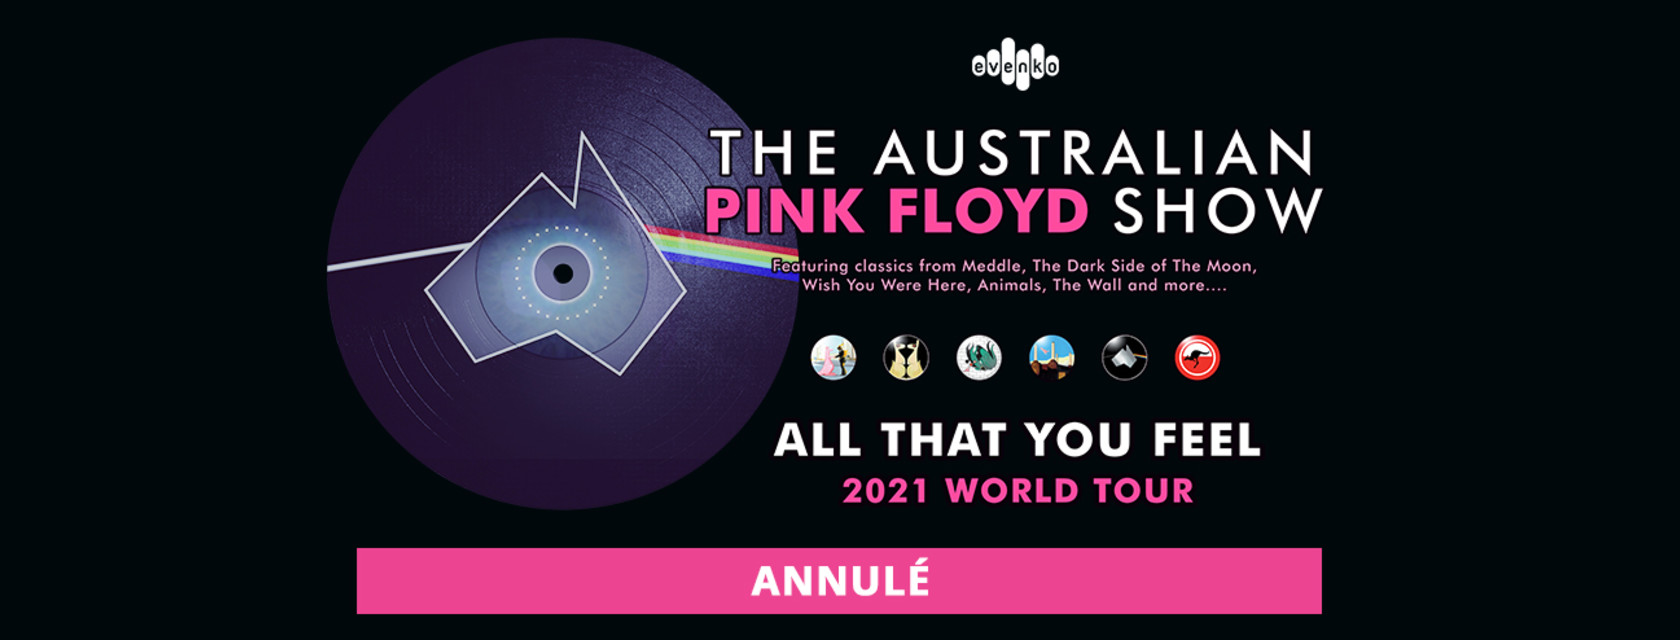 The Australian Pink Floyd Show cancels its North American tour: September 19 show at Cogeco Amphitheater canceled